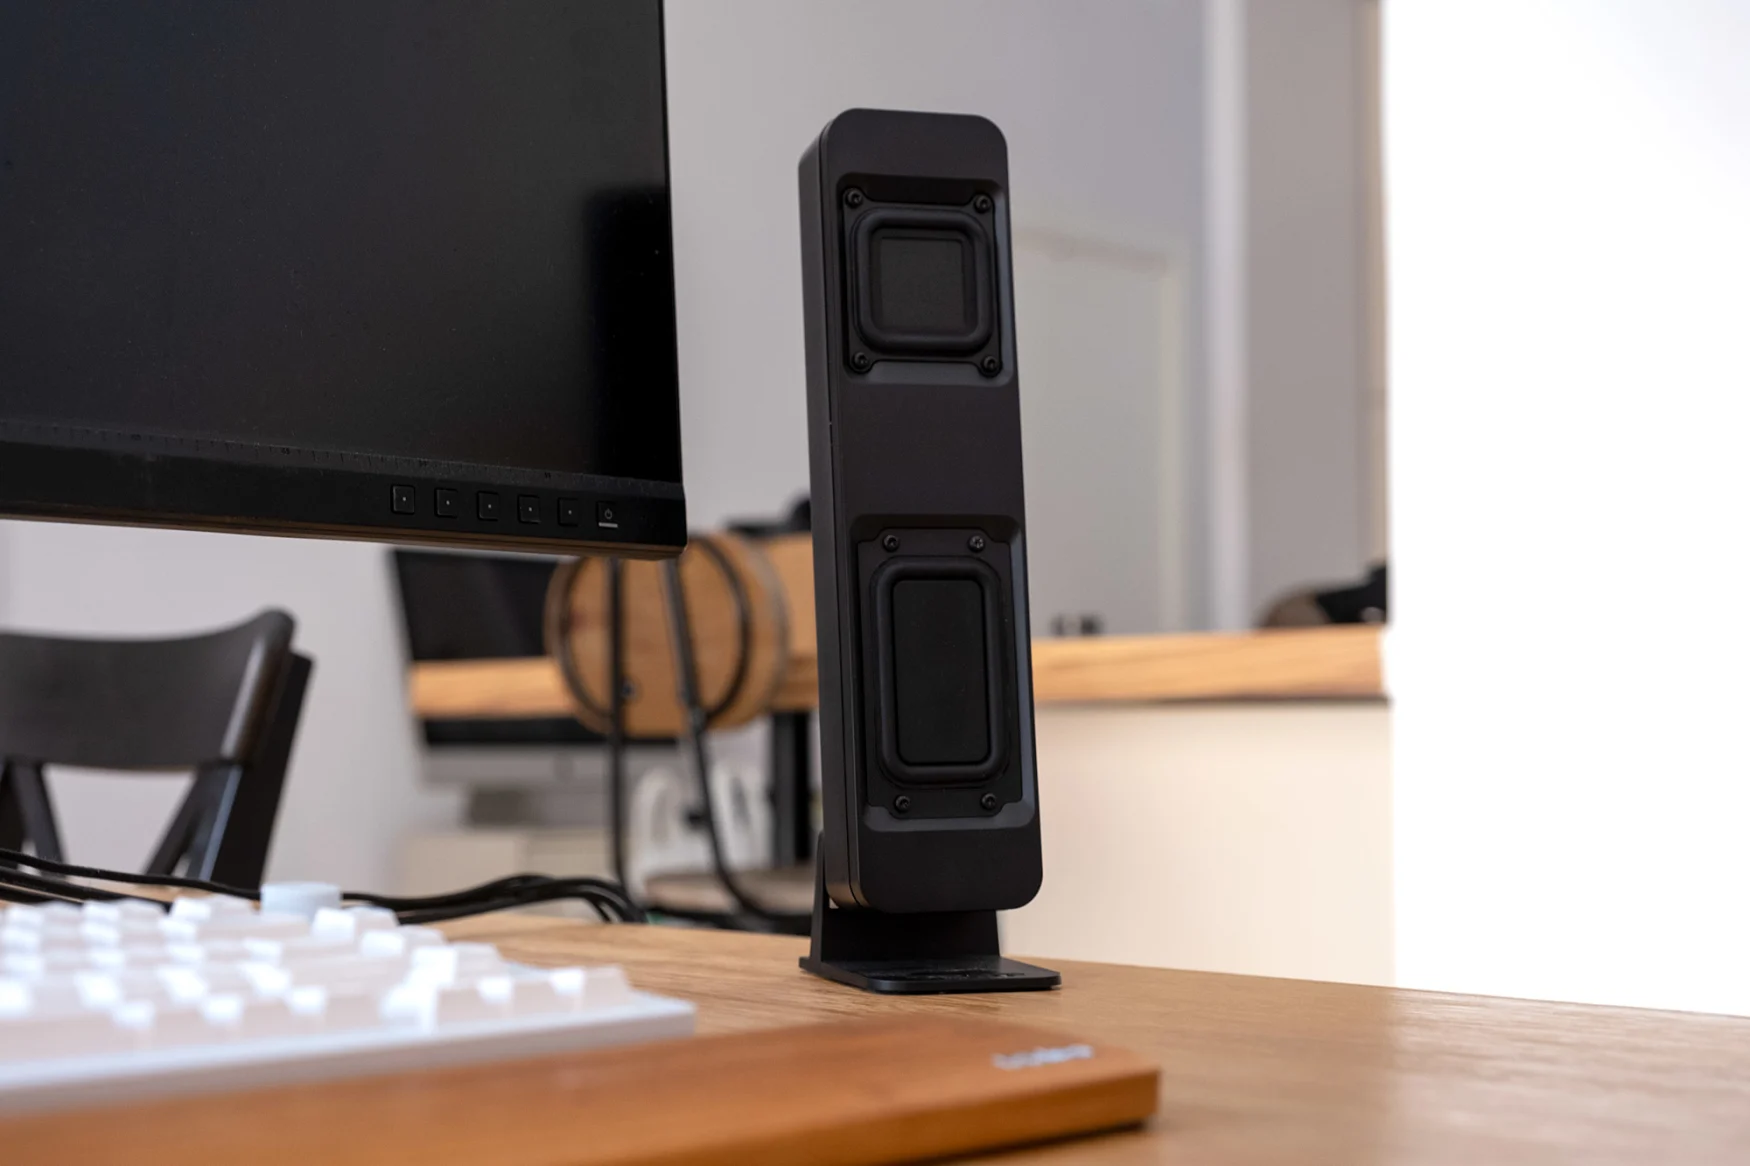 A Drop BMR1 speaker pictured on a desk next to a PC monitor and keyboard.